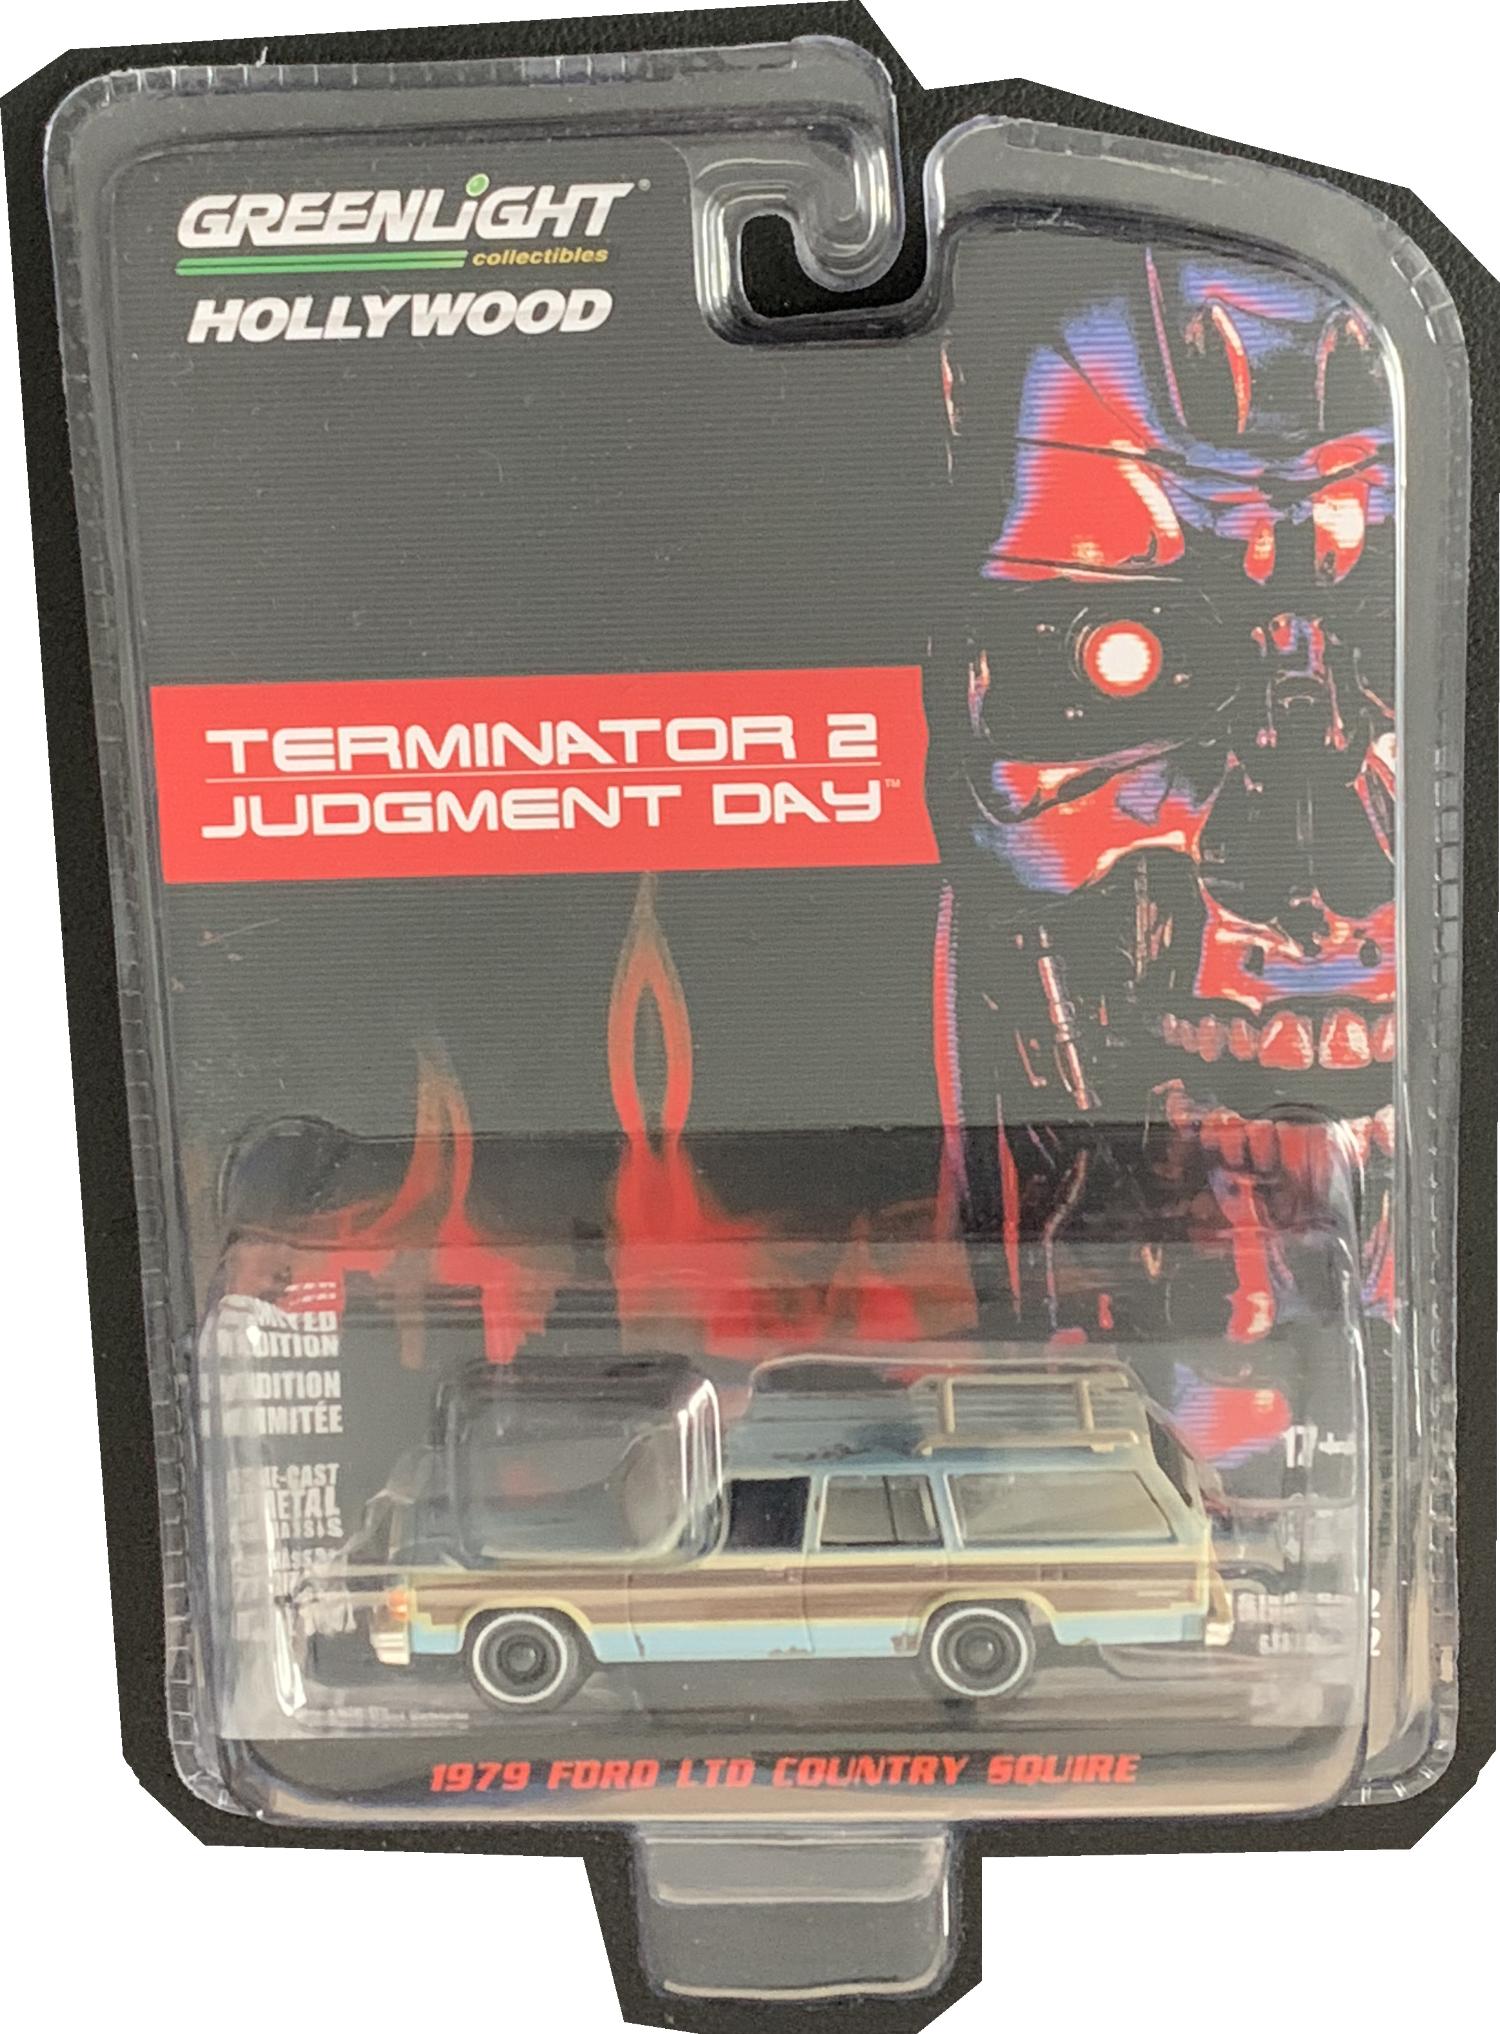 Terminator 2 Judgment Day 1979 Ford Ltd Country Squire 1:64 scale model